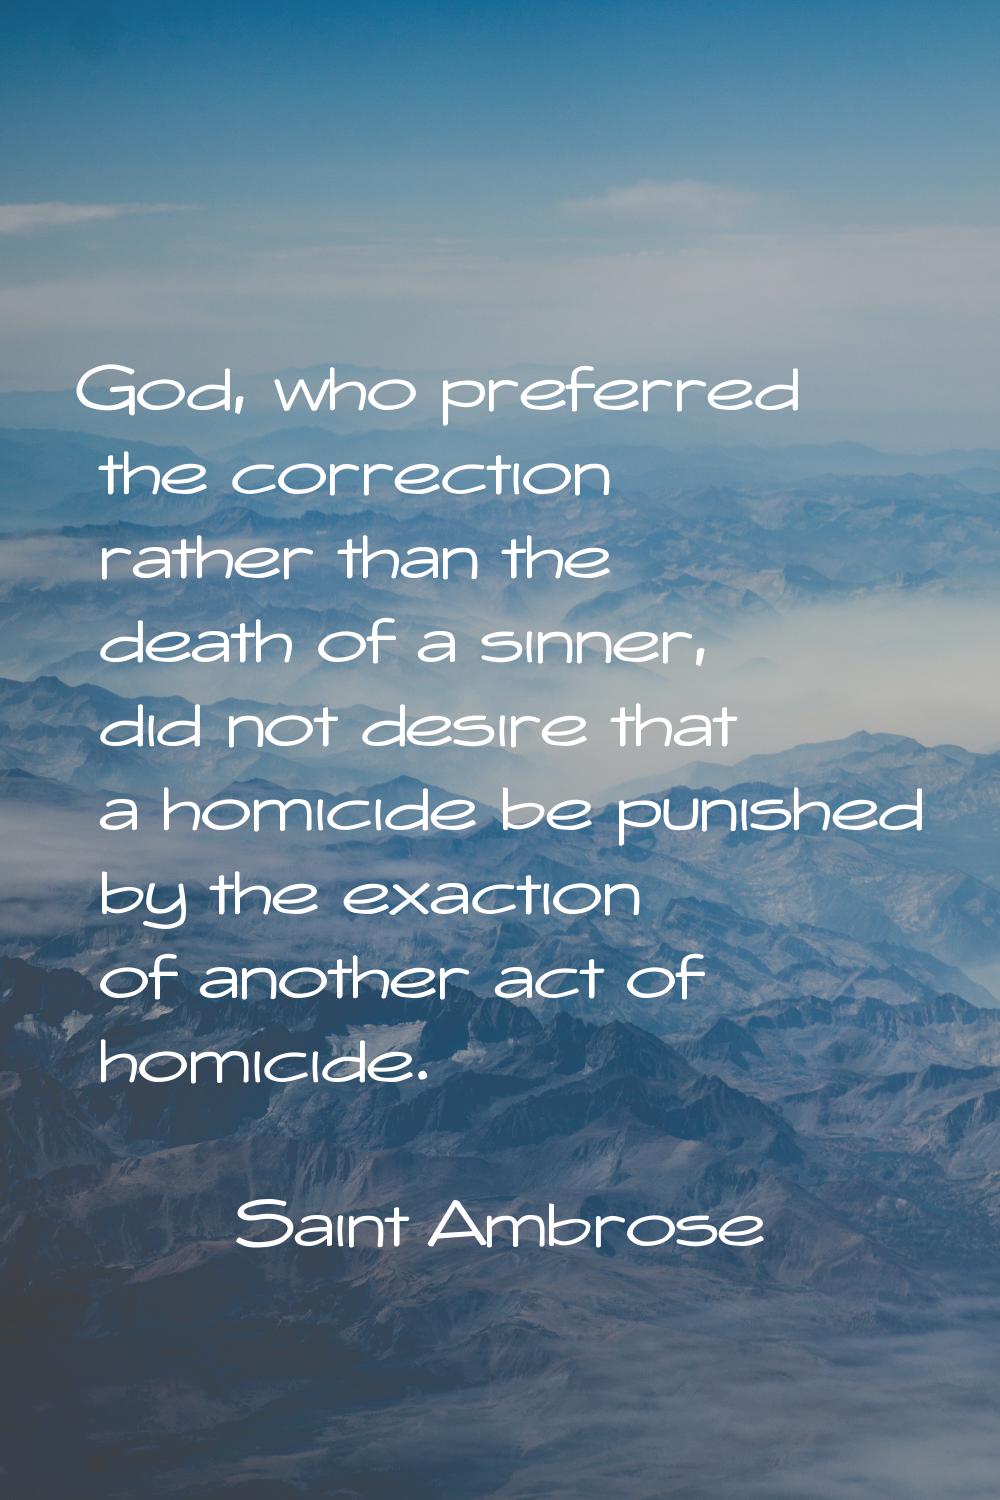 God, who preferred the correction rather than the death of a sinner, did not desire that a homicide